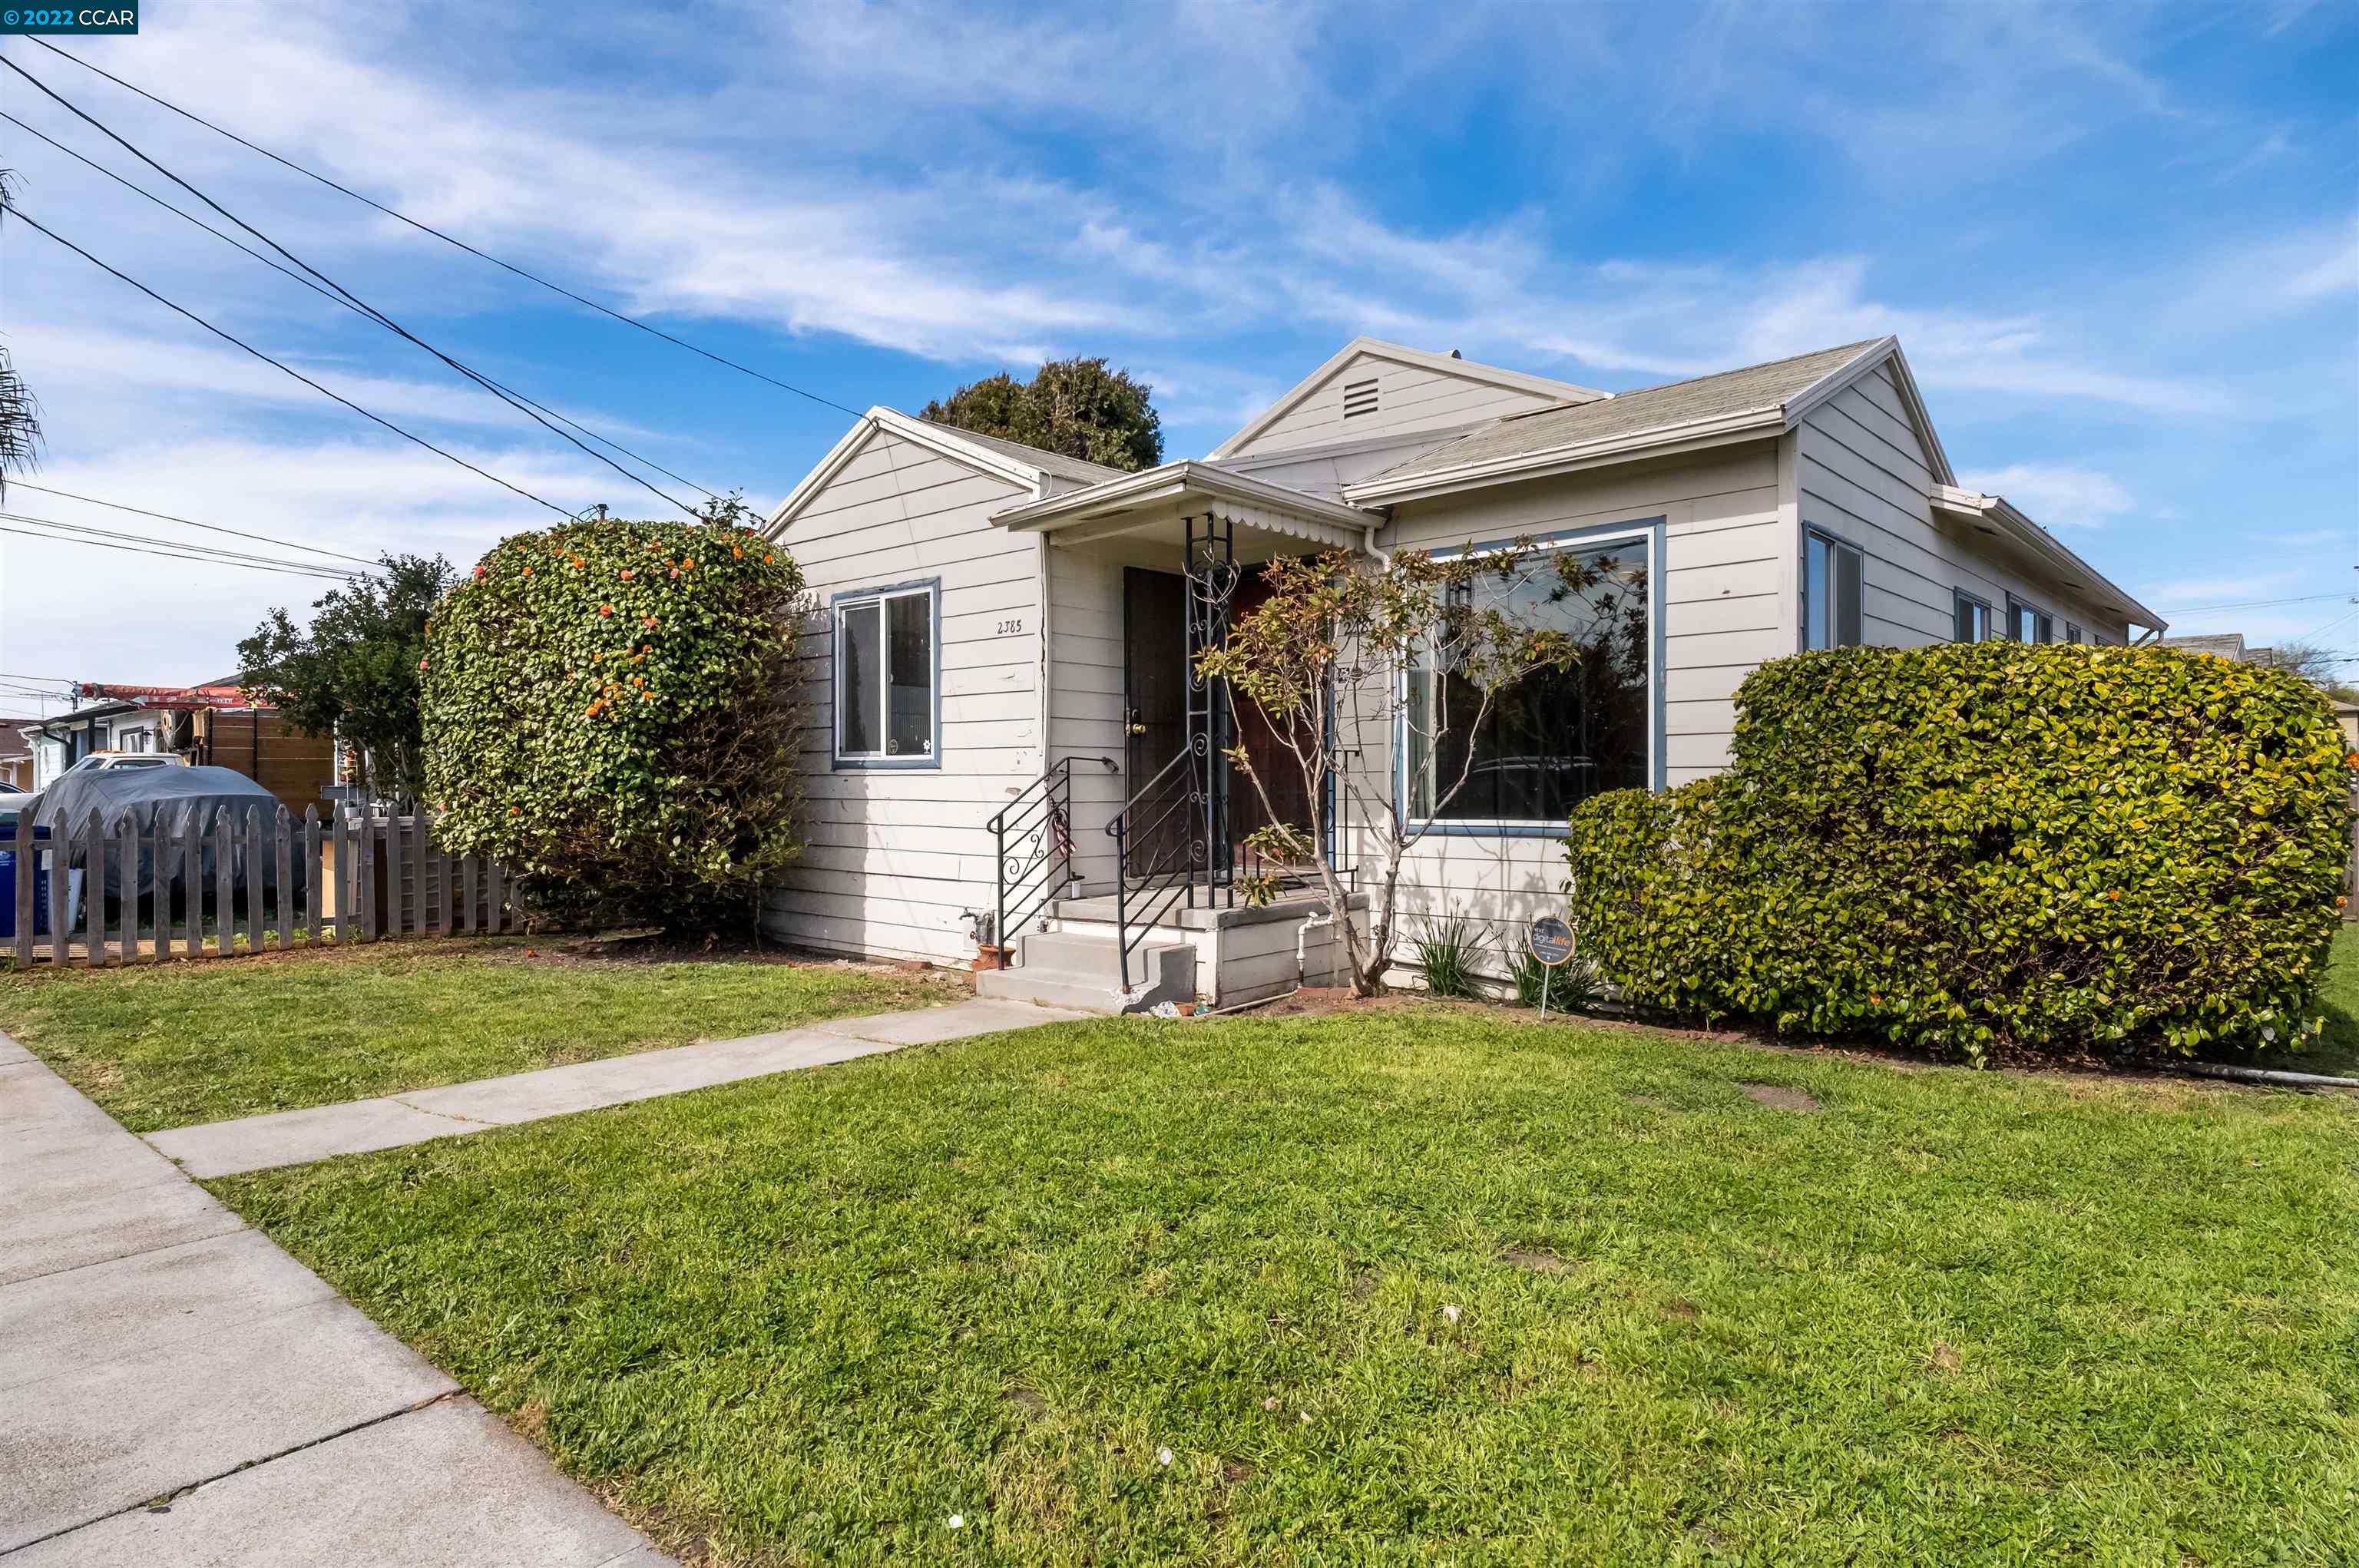 Photo of 2385 Lincoln Ave in Richmond, CA